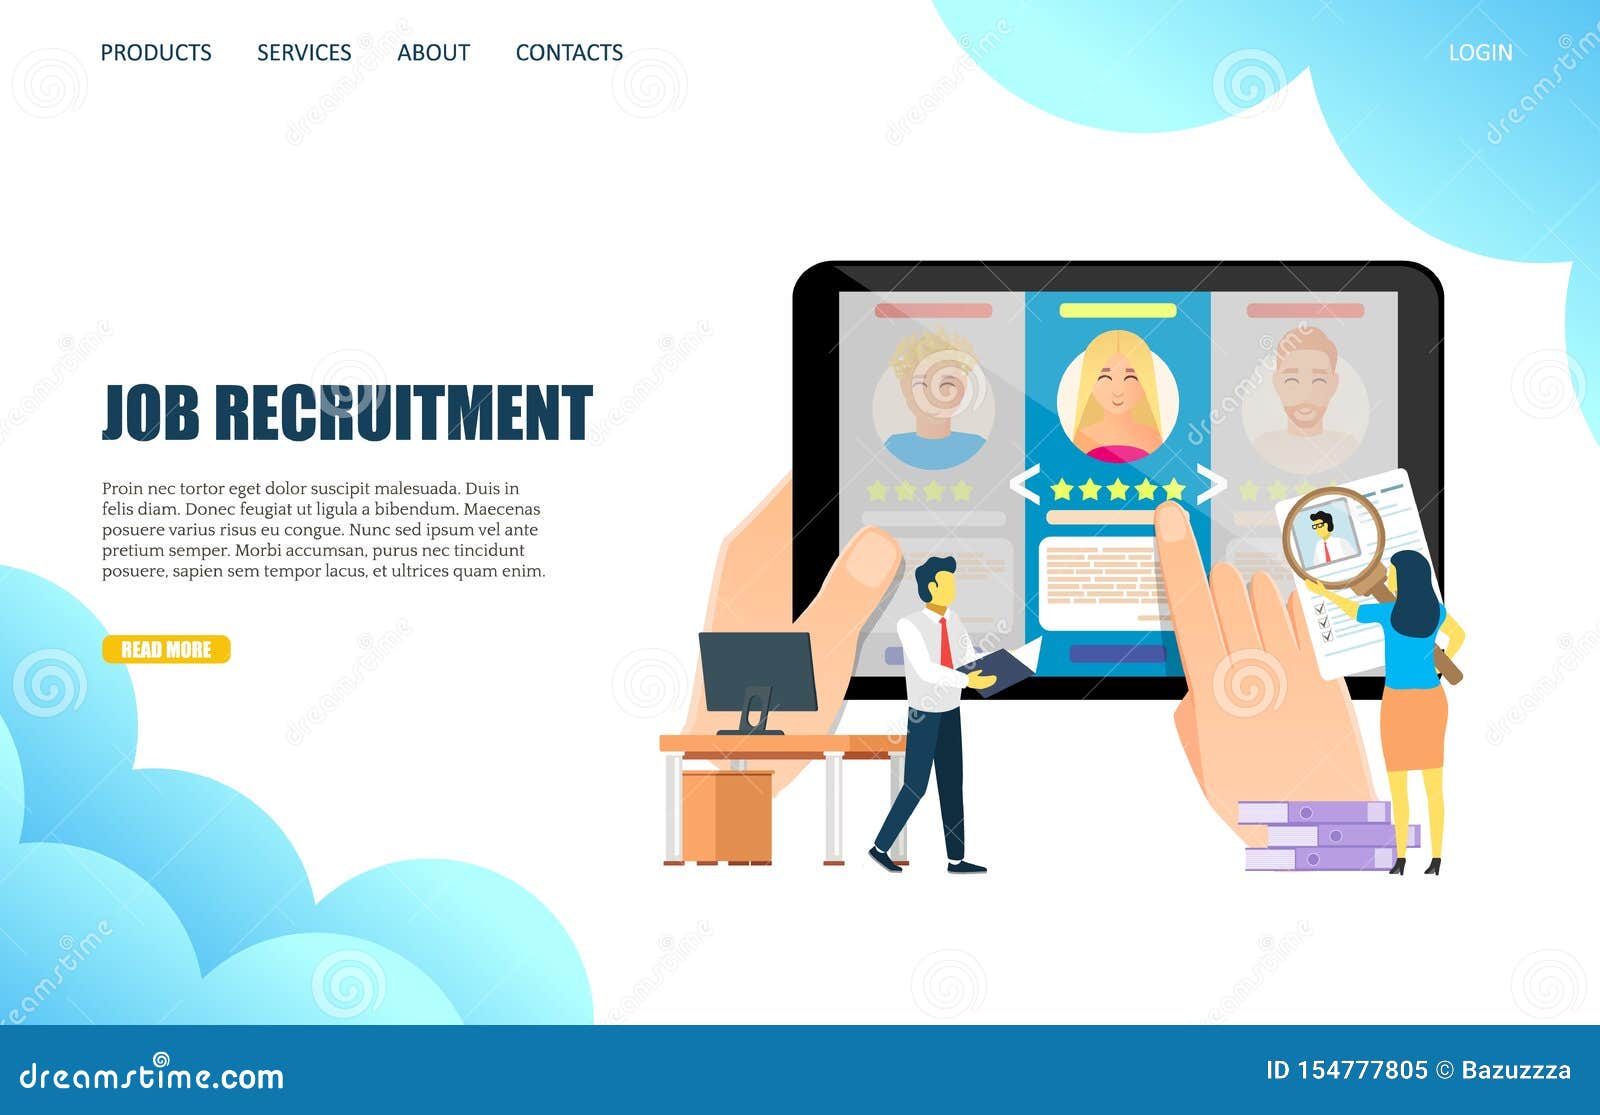 Web pages concerning employment jobs advertised on internet